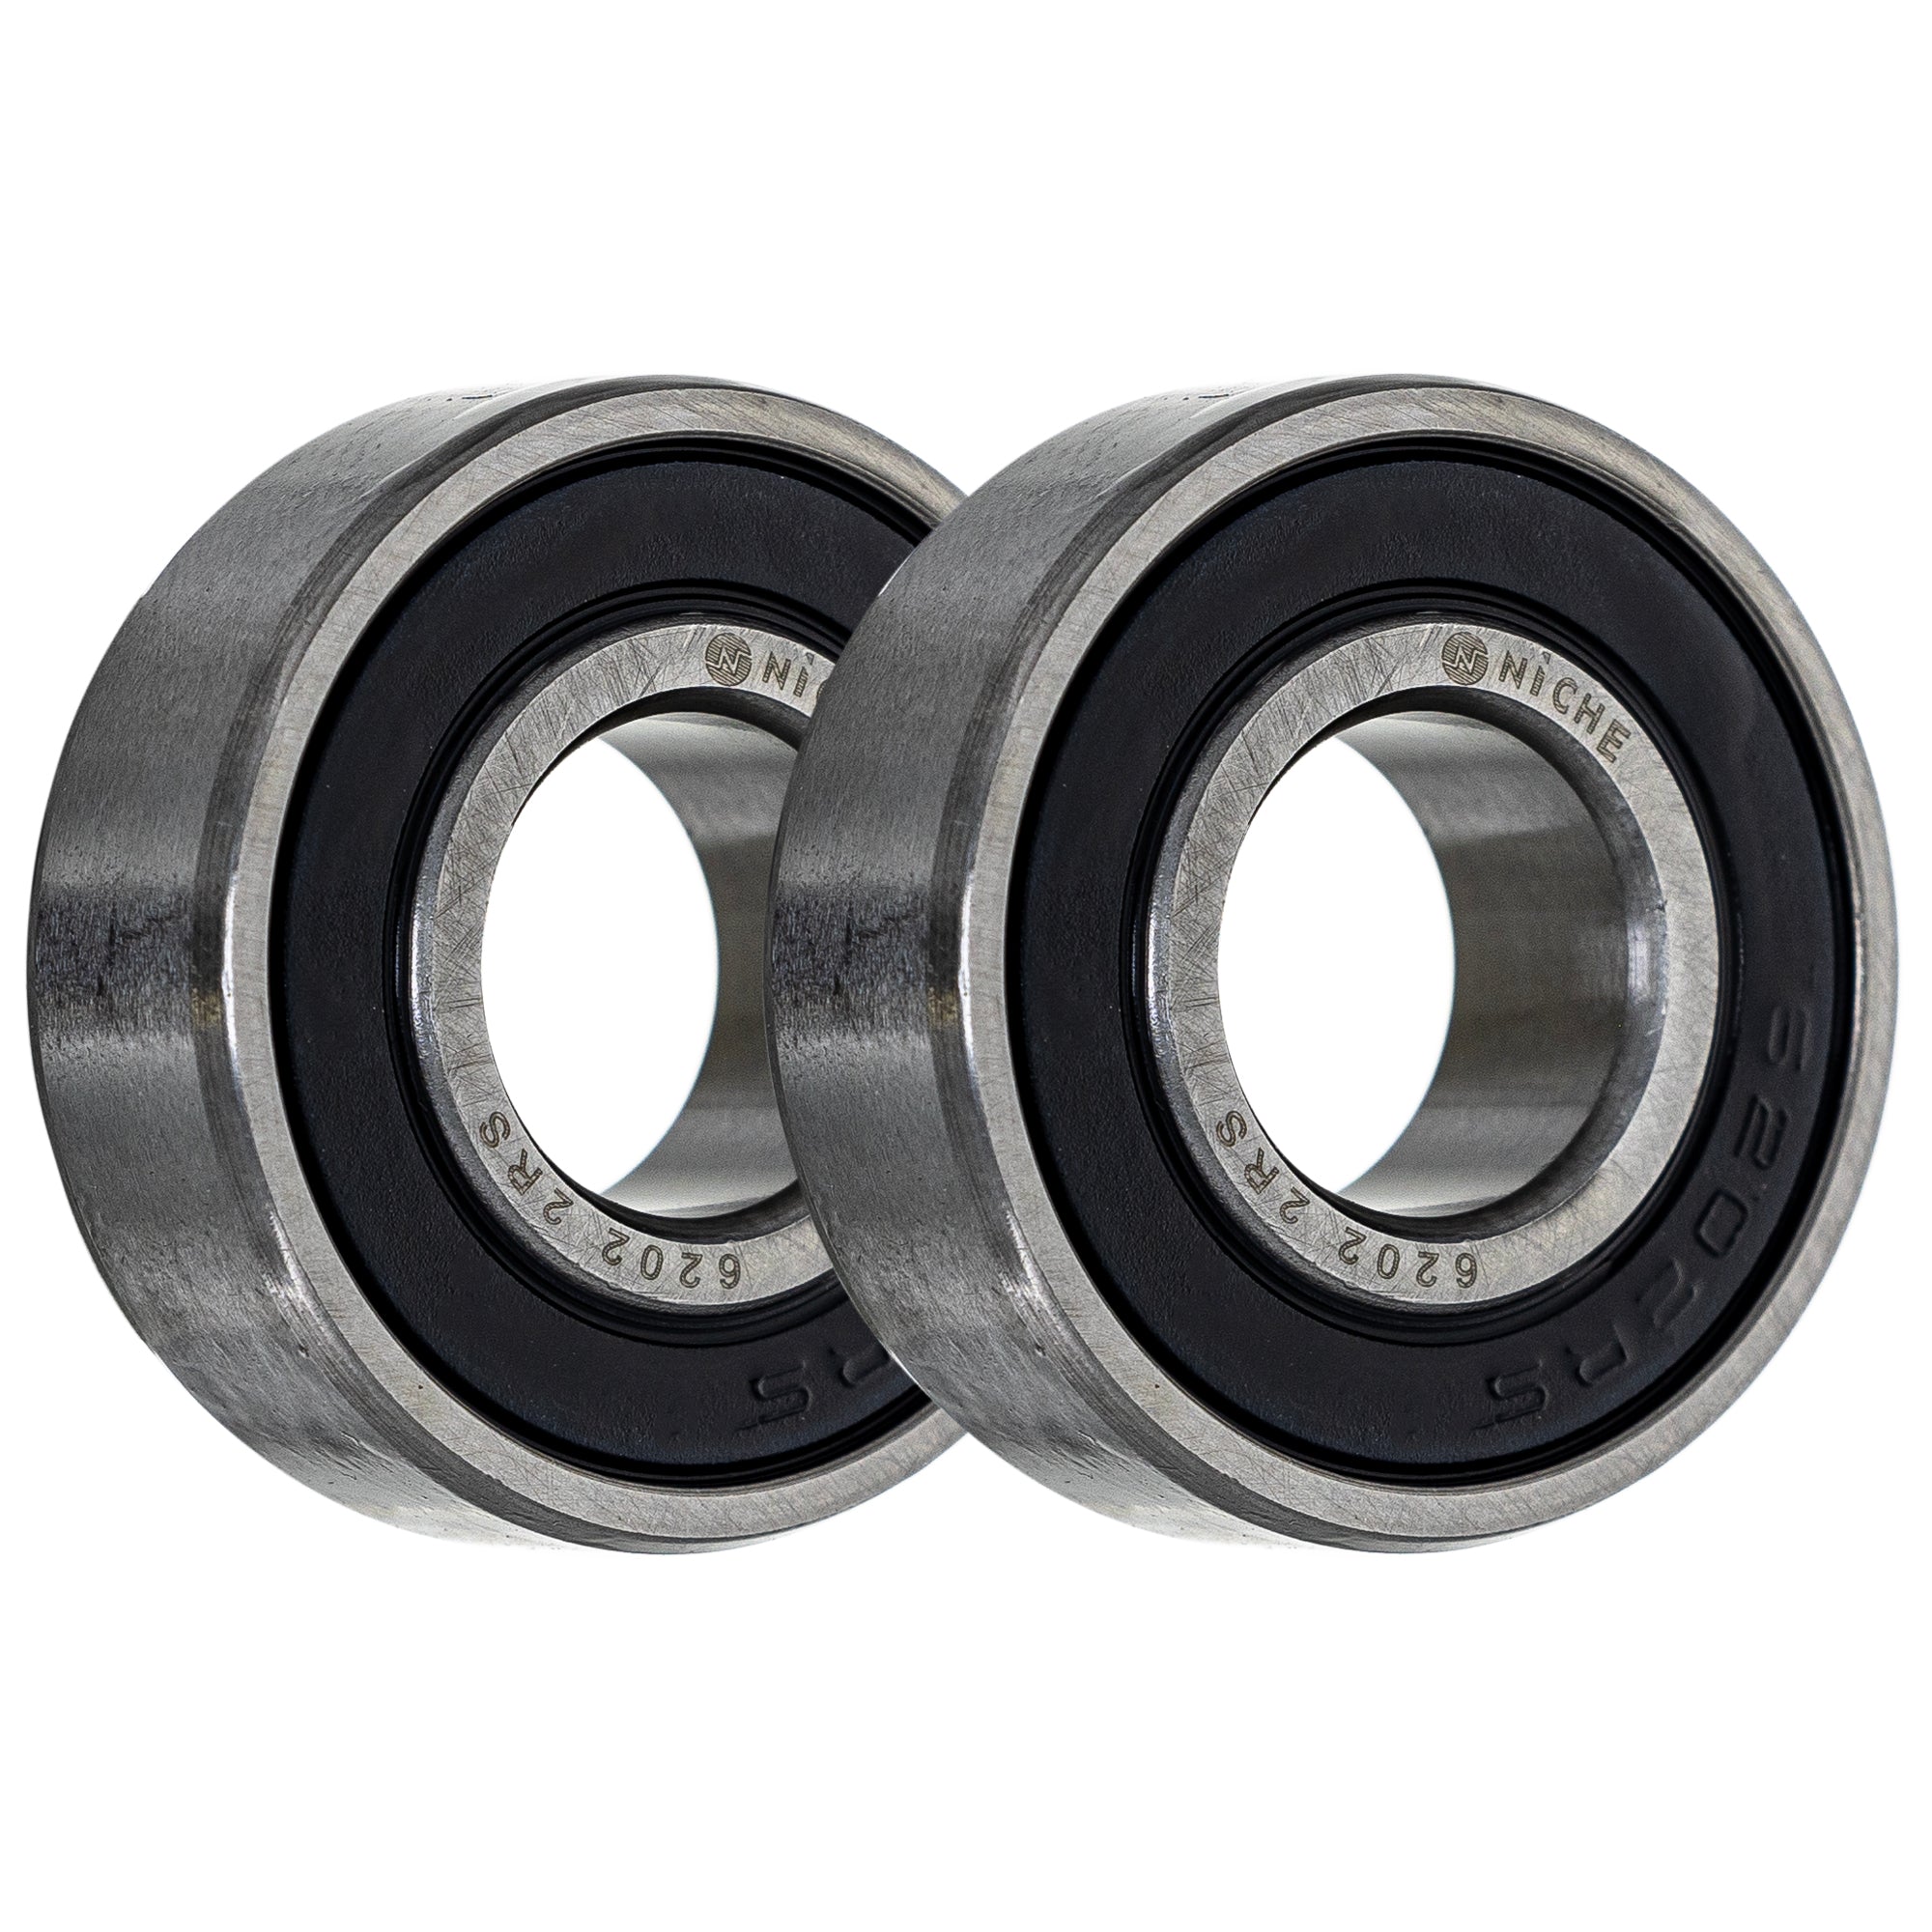 Single Row, Deep Groove, Ball Bearing Pack of 2 2-Pack for zOTHER Polaris Arctic Cat NICHE 519-CBB2227R